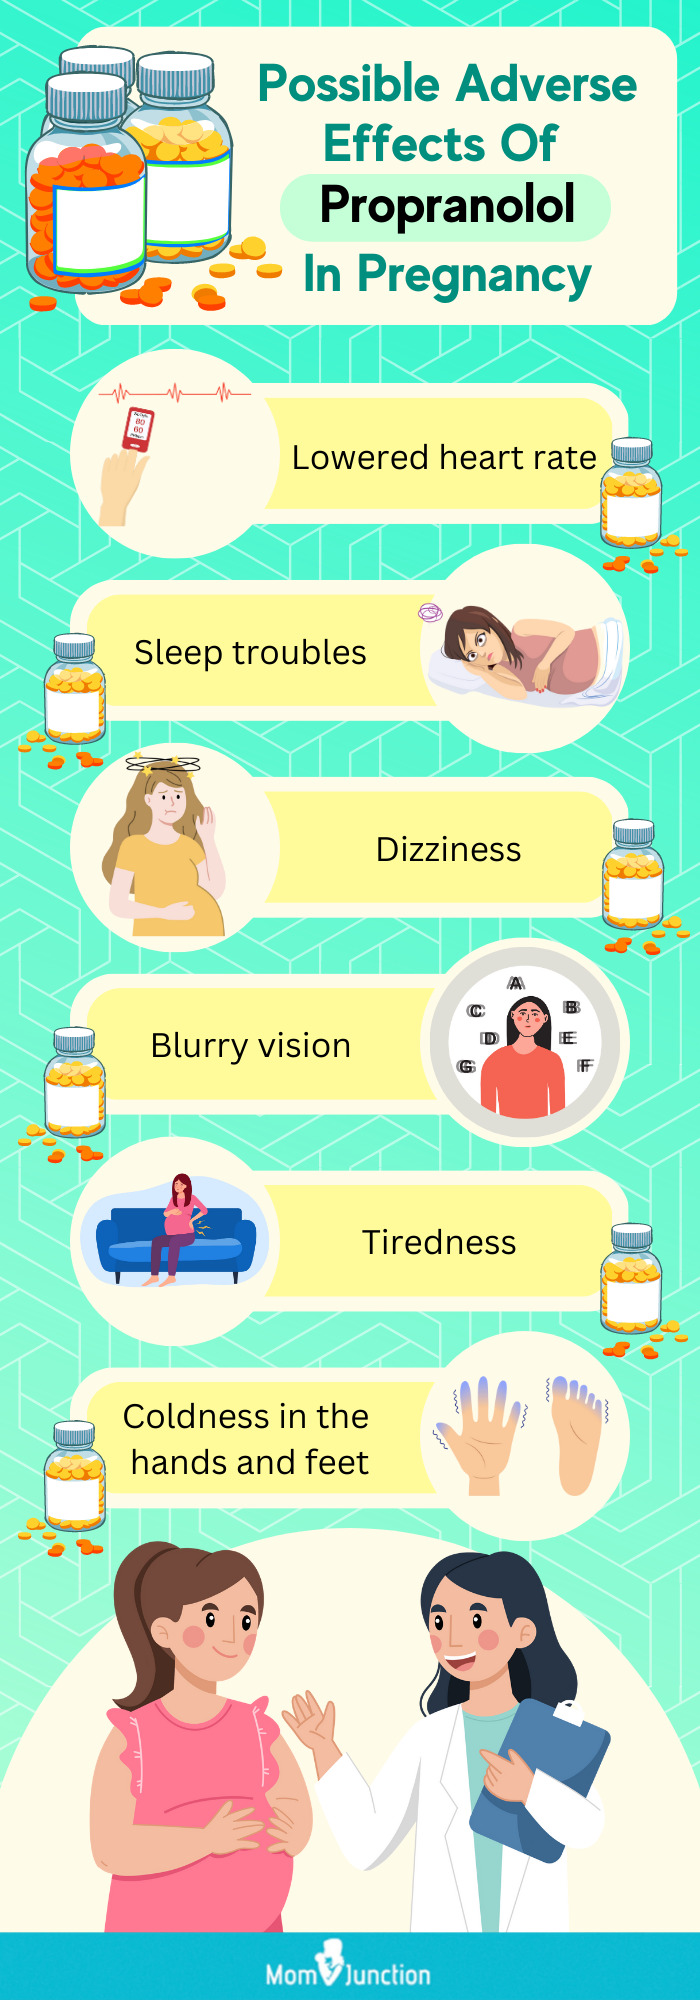 side effects of propranolol during pregnancy (infographic)